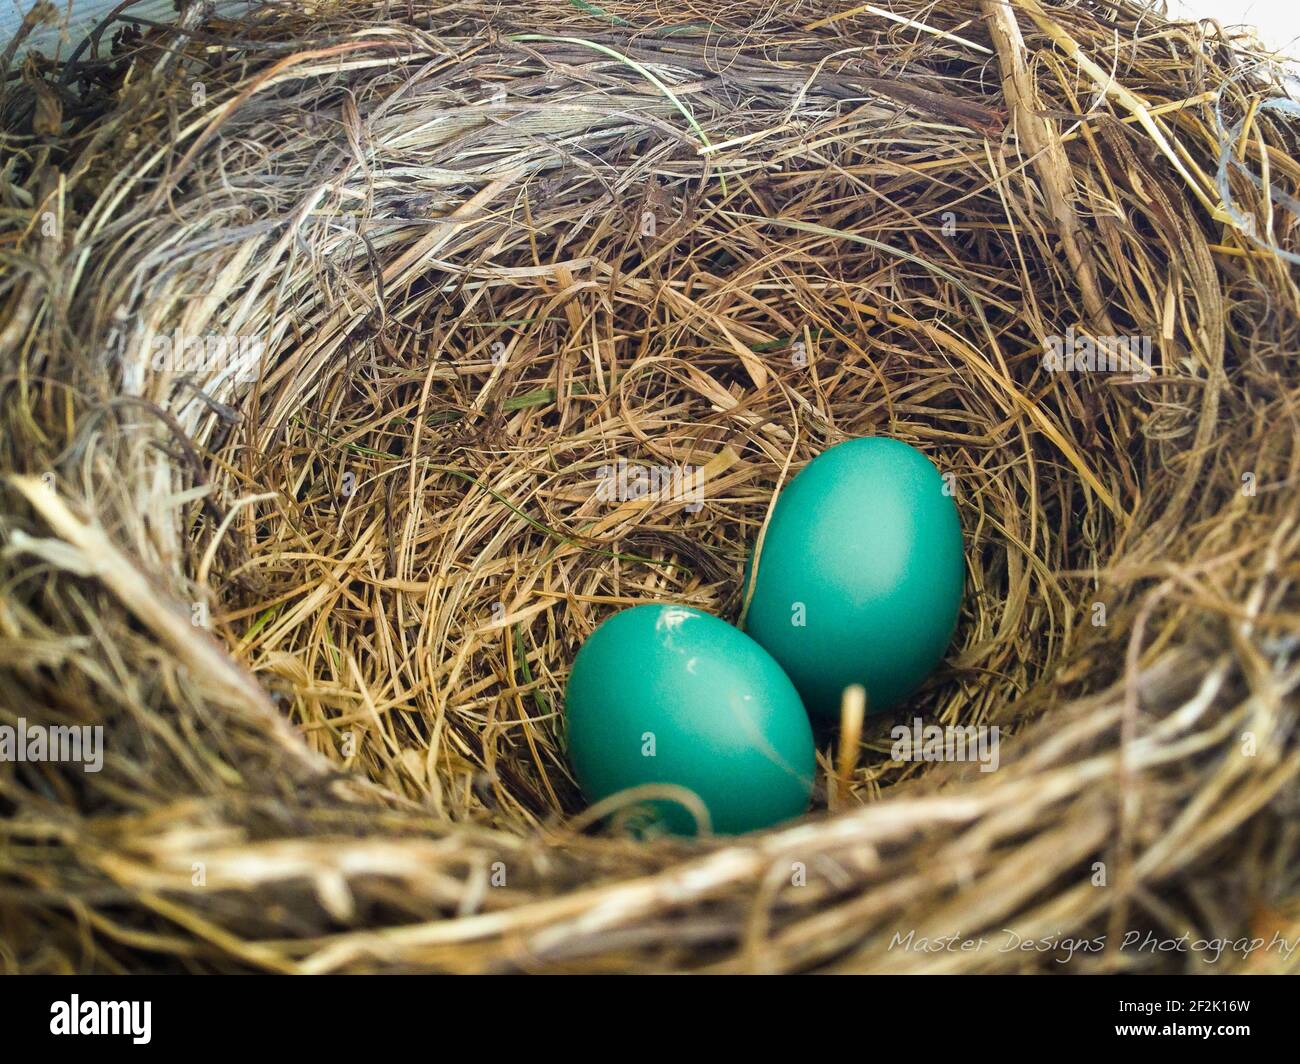 2 Two Robin Eggs In A Woven Nest Stock Photo